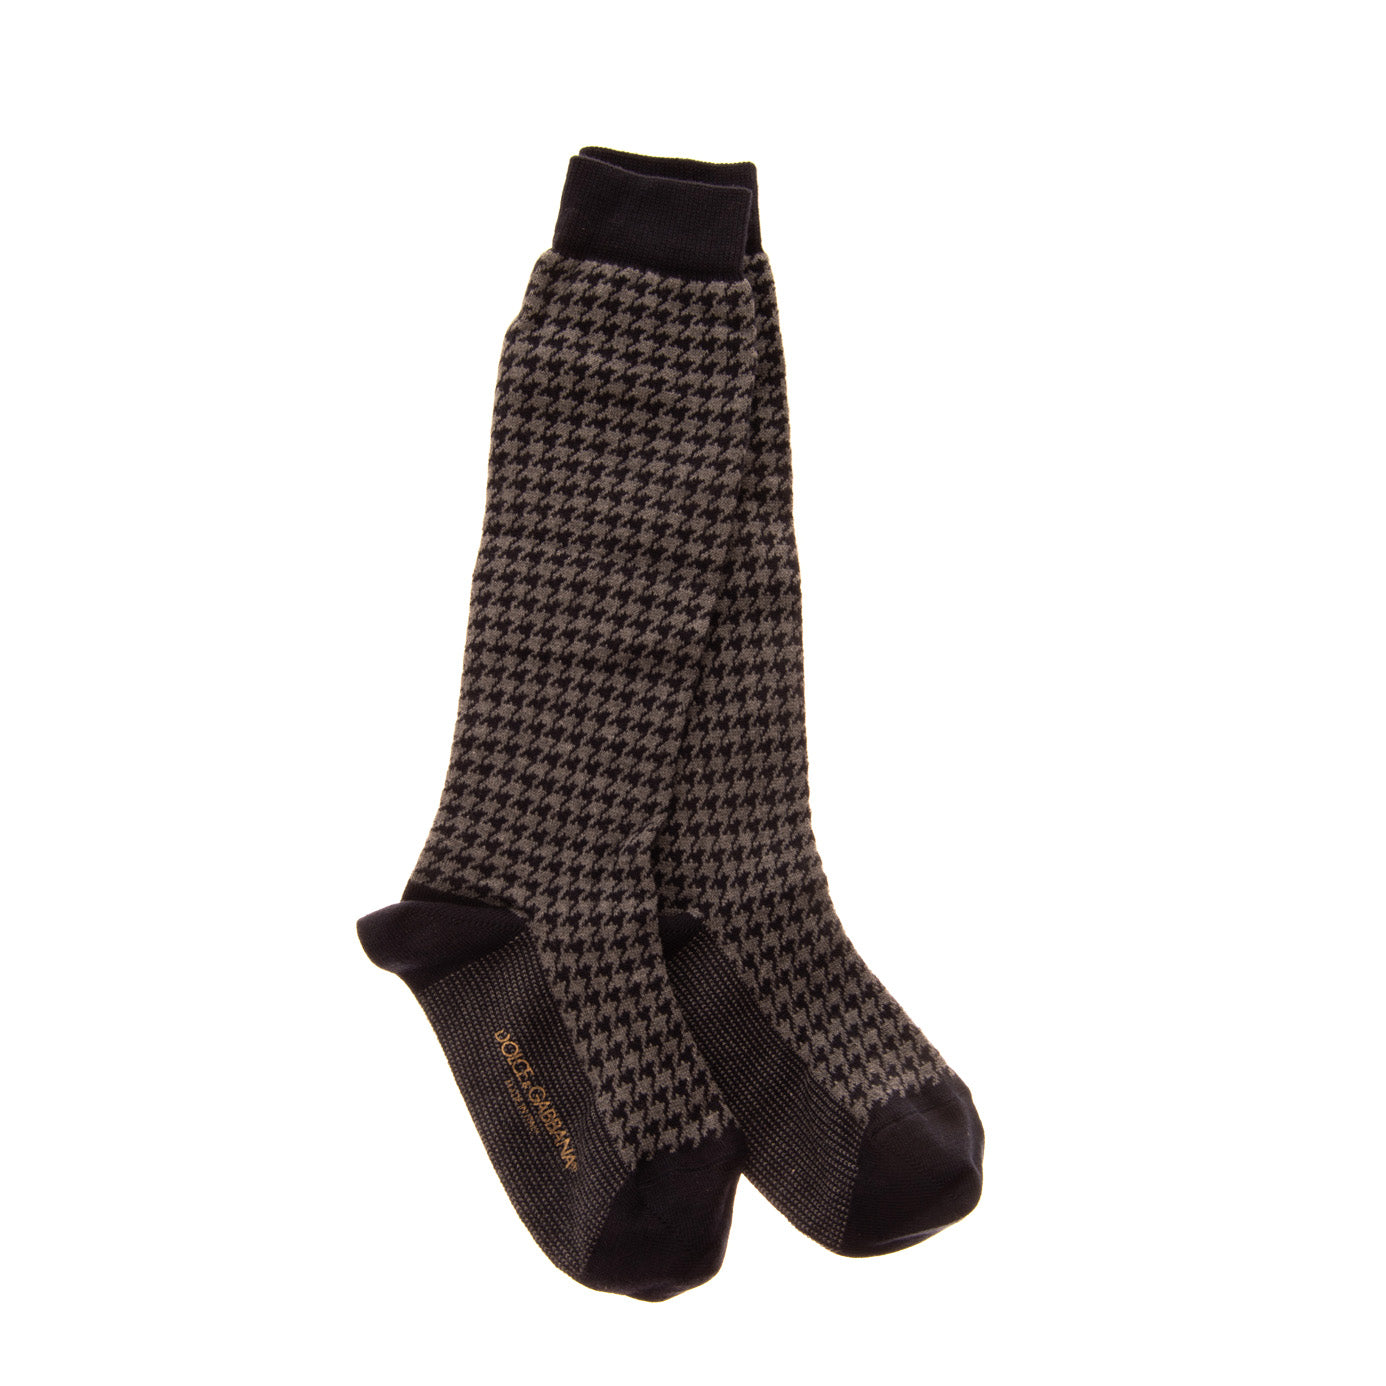 DOLCE & GABBANA Everyday Socks Size L / 10-12Y Long Houndstooth Made in Italy gallery main photo